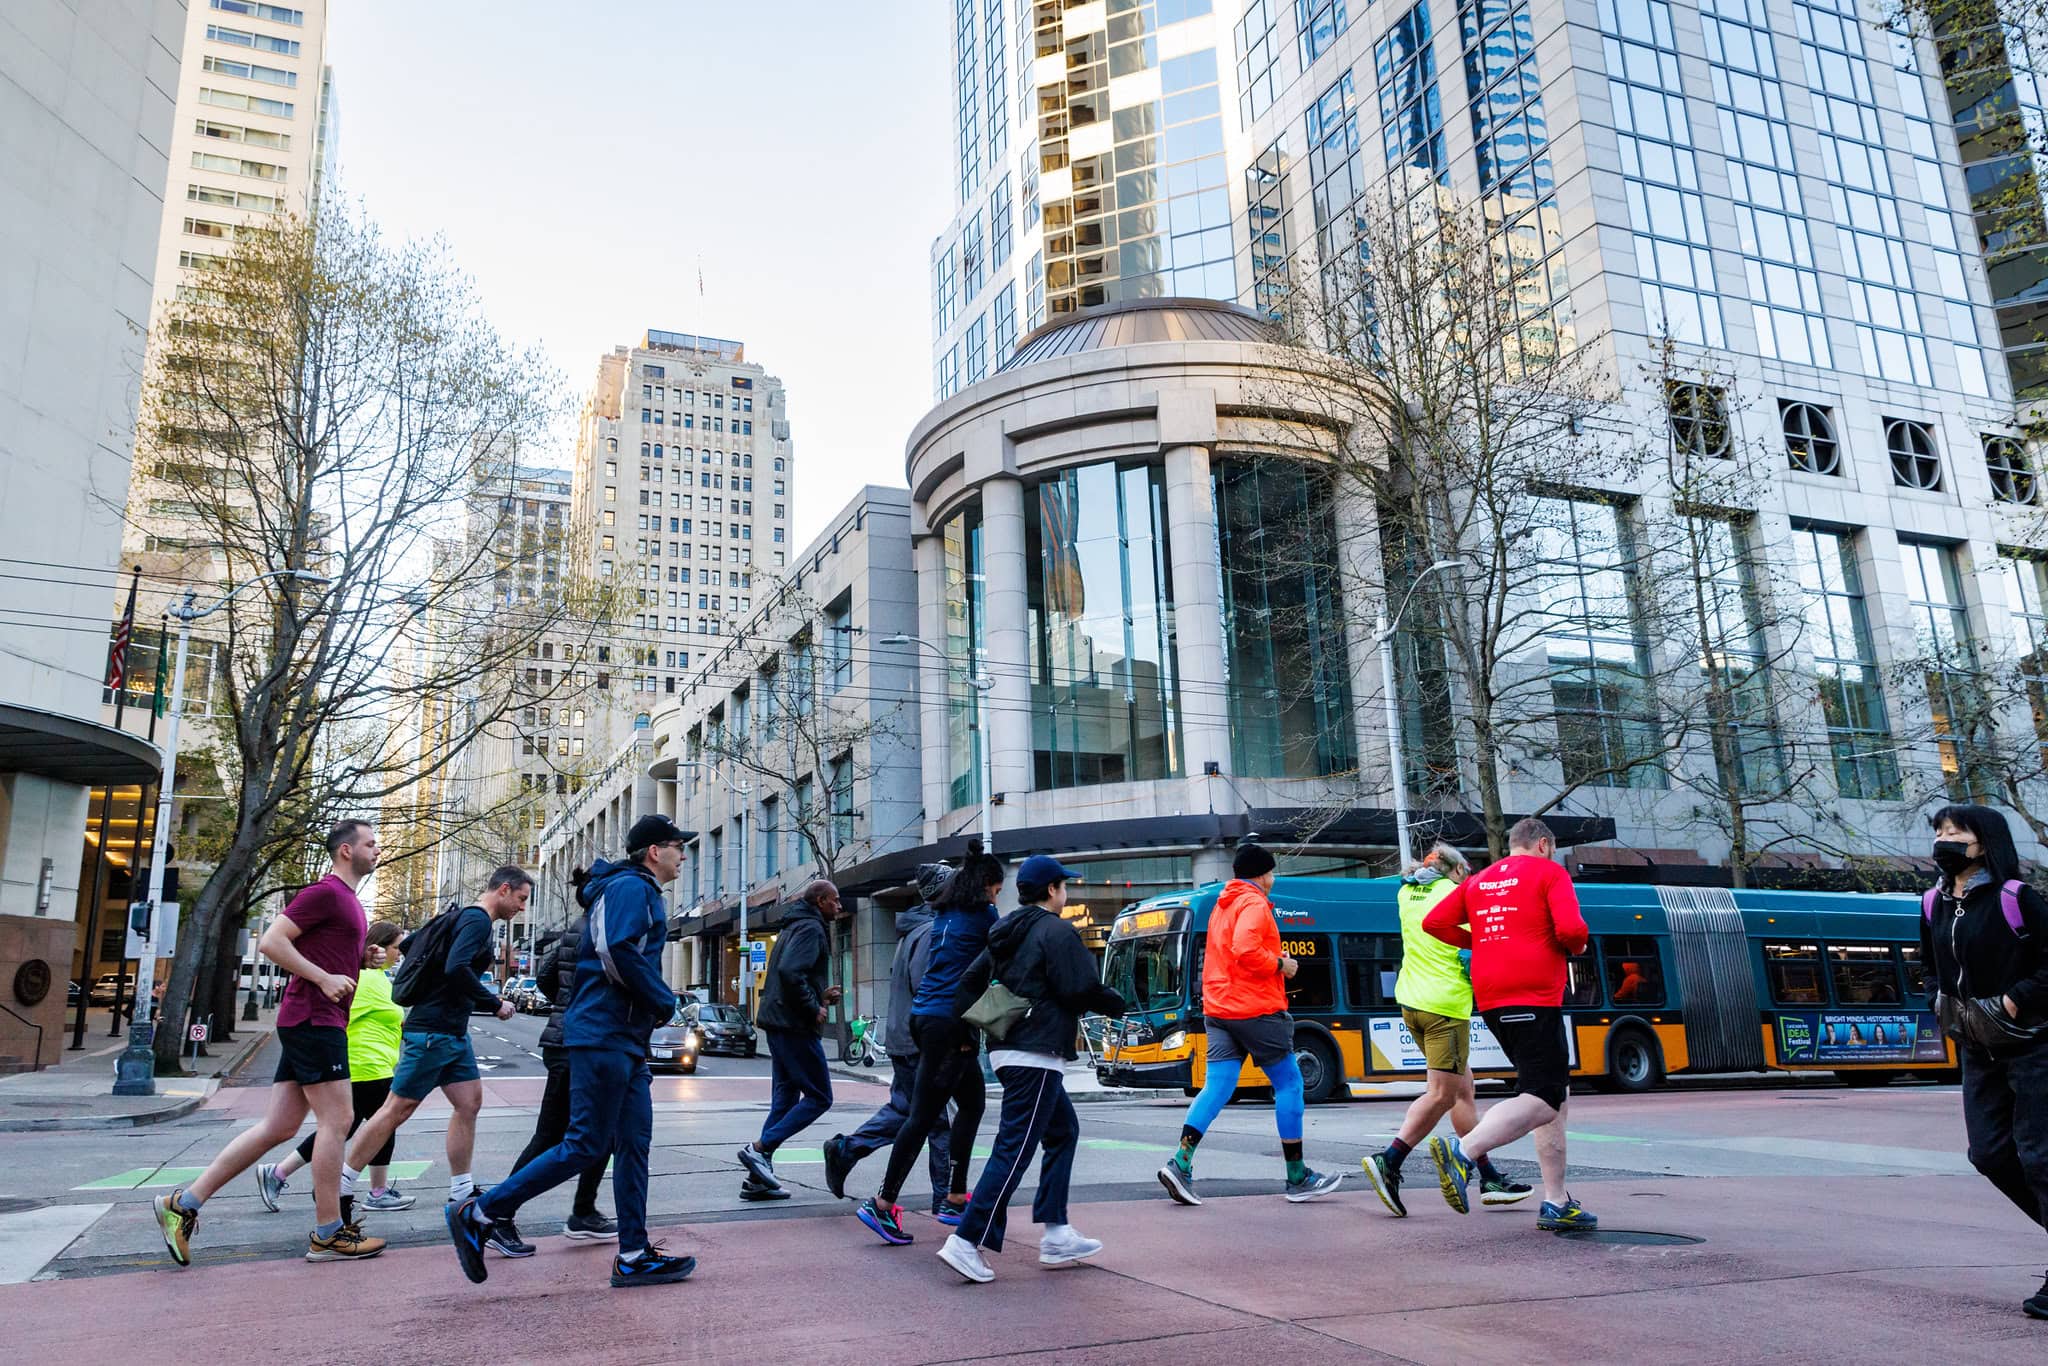 A group of people run through the city streets.